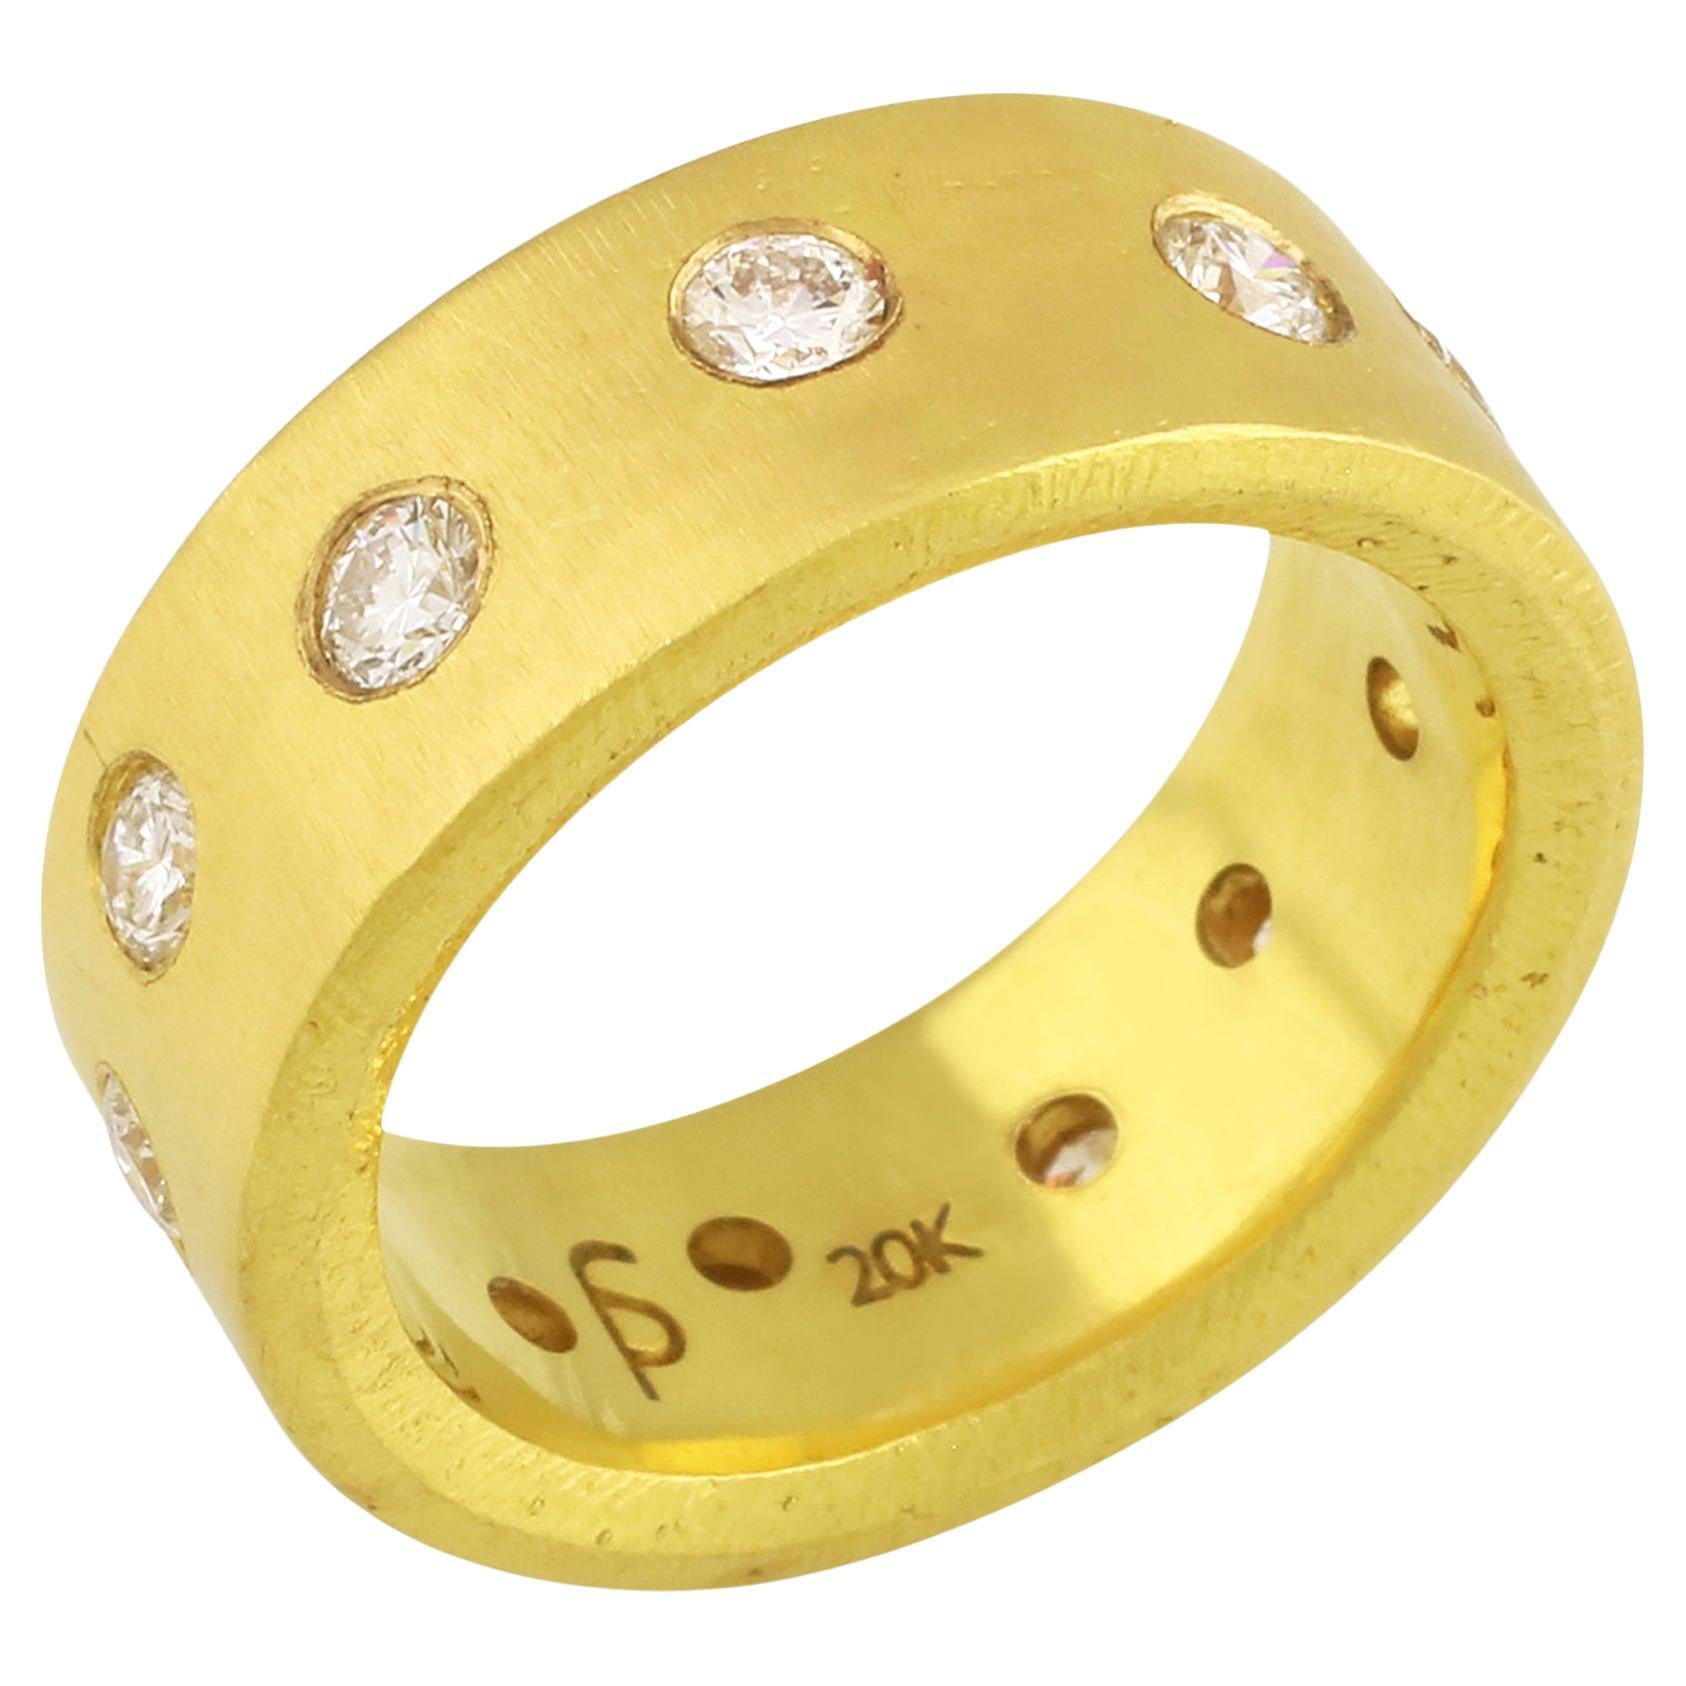 PHILIPPE SPENCER 20K Gold 8x2mm Band mit 1,03 Ct. Tw. COLORLESS Diamanten